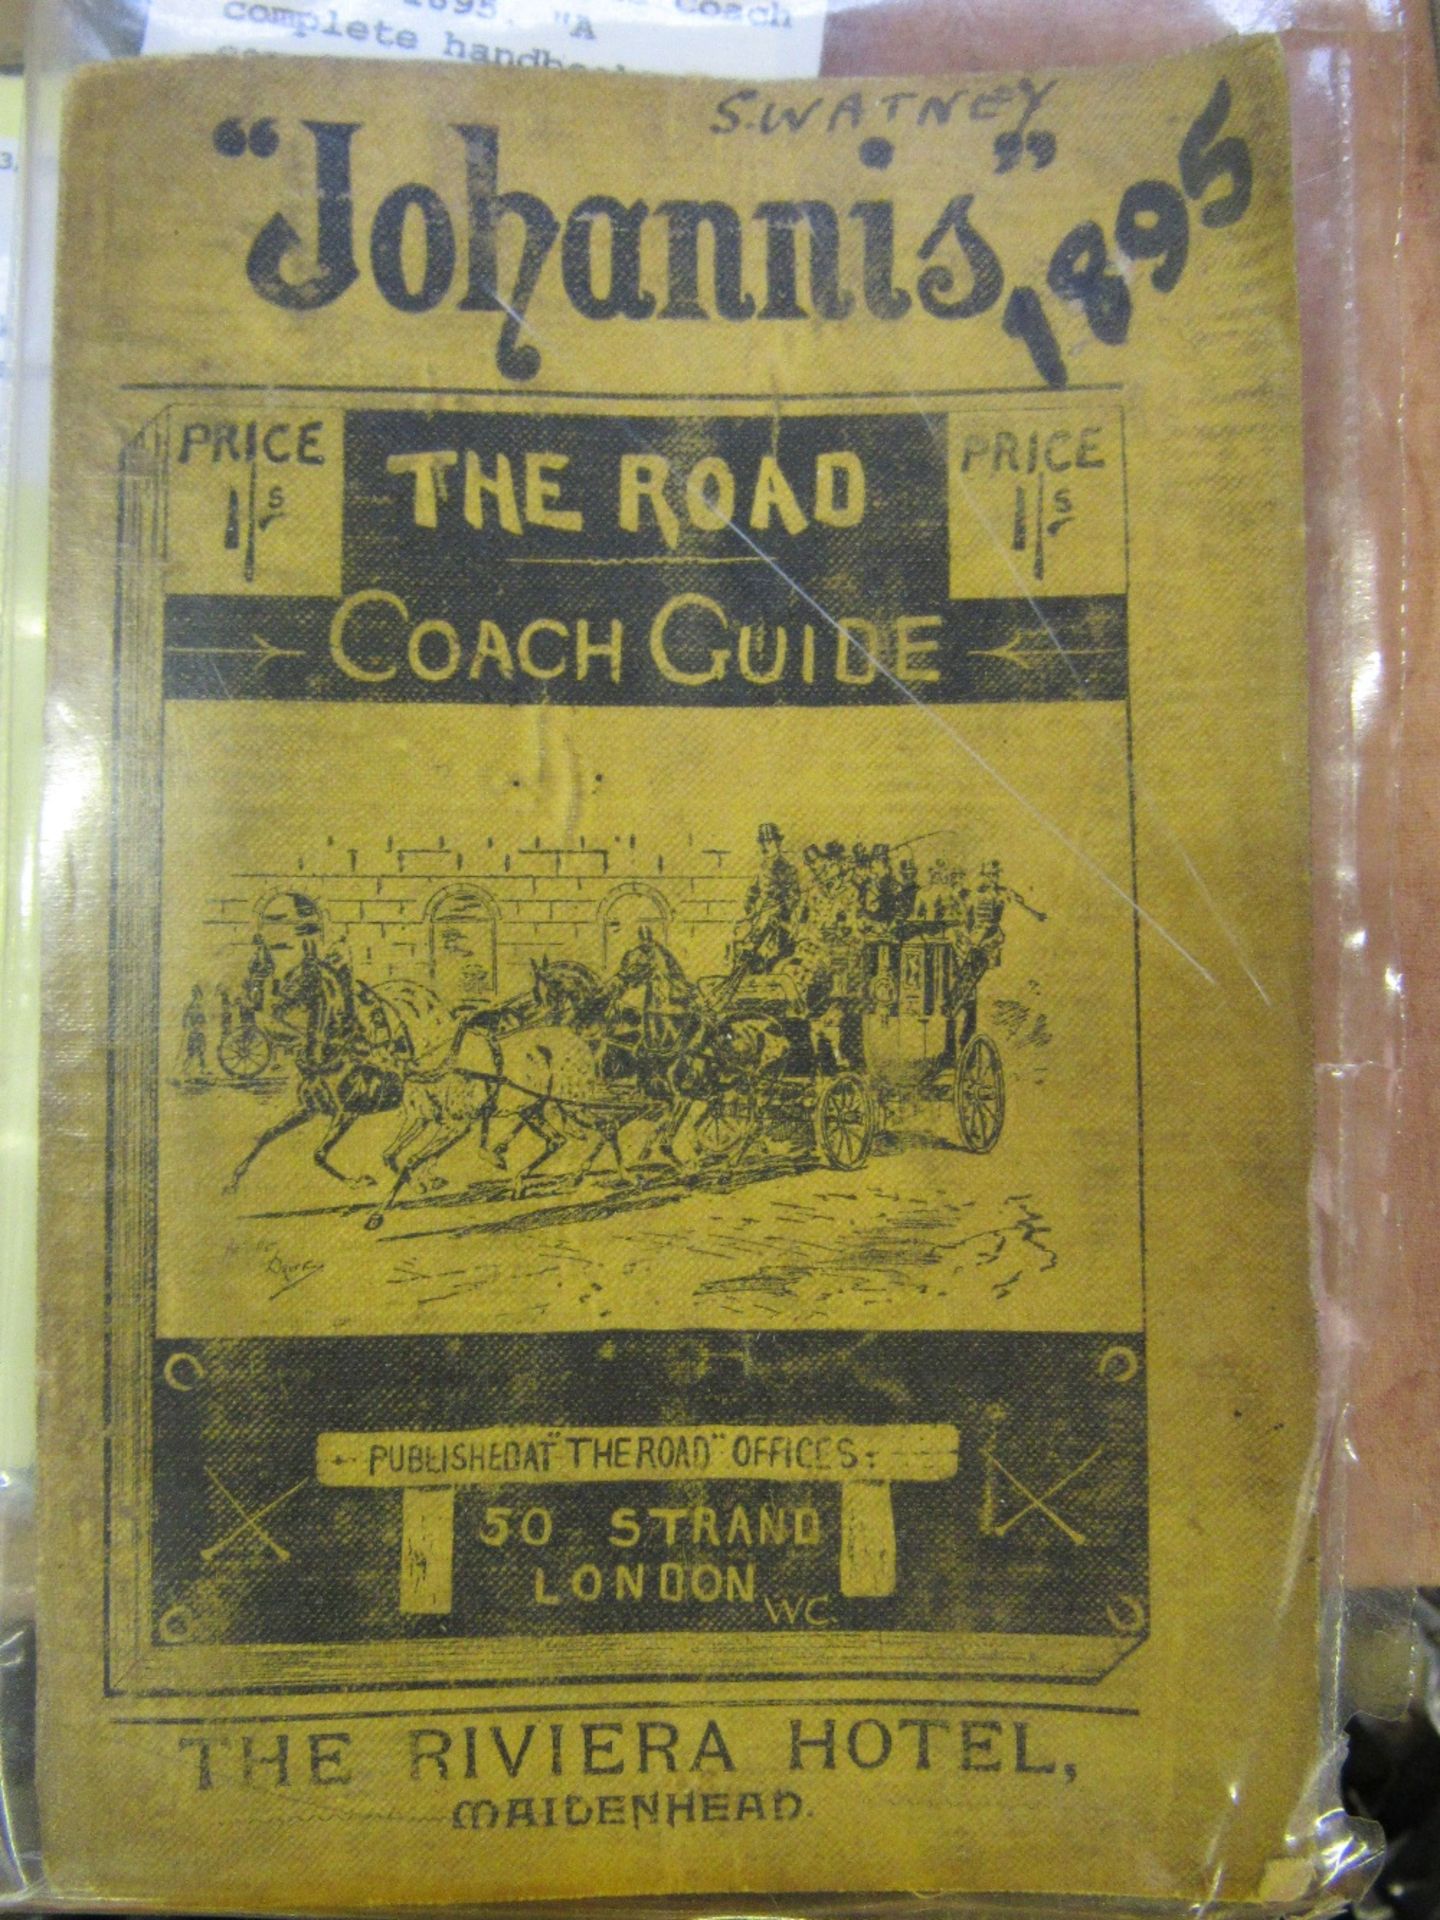 Johannis The Road Coach Guide; 1895. "A complete handbook" compiled and edited by Forutibras, Editor